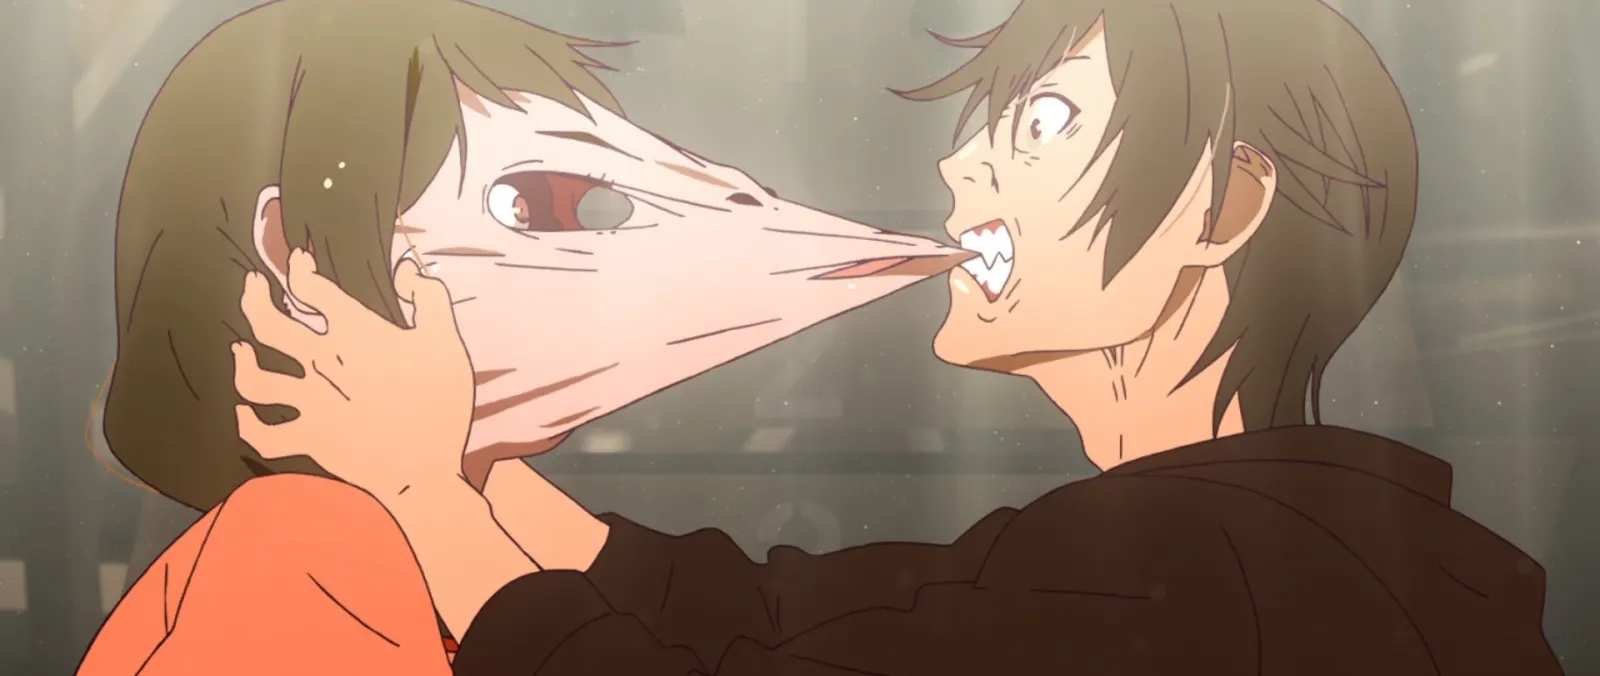 The next evolution of Hanekawa and Araragi’s relationship. That’s not normally what people think of when they talk about teens eating each other’s faces off though.